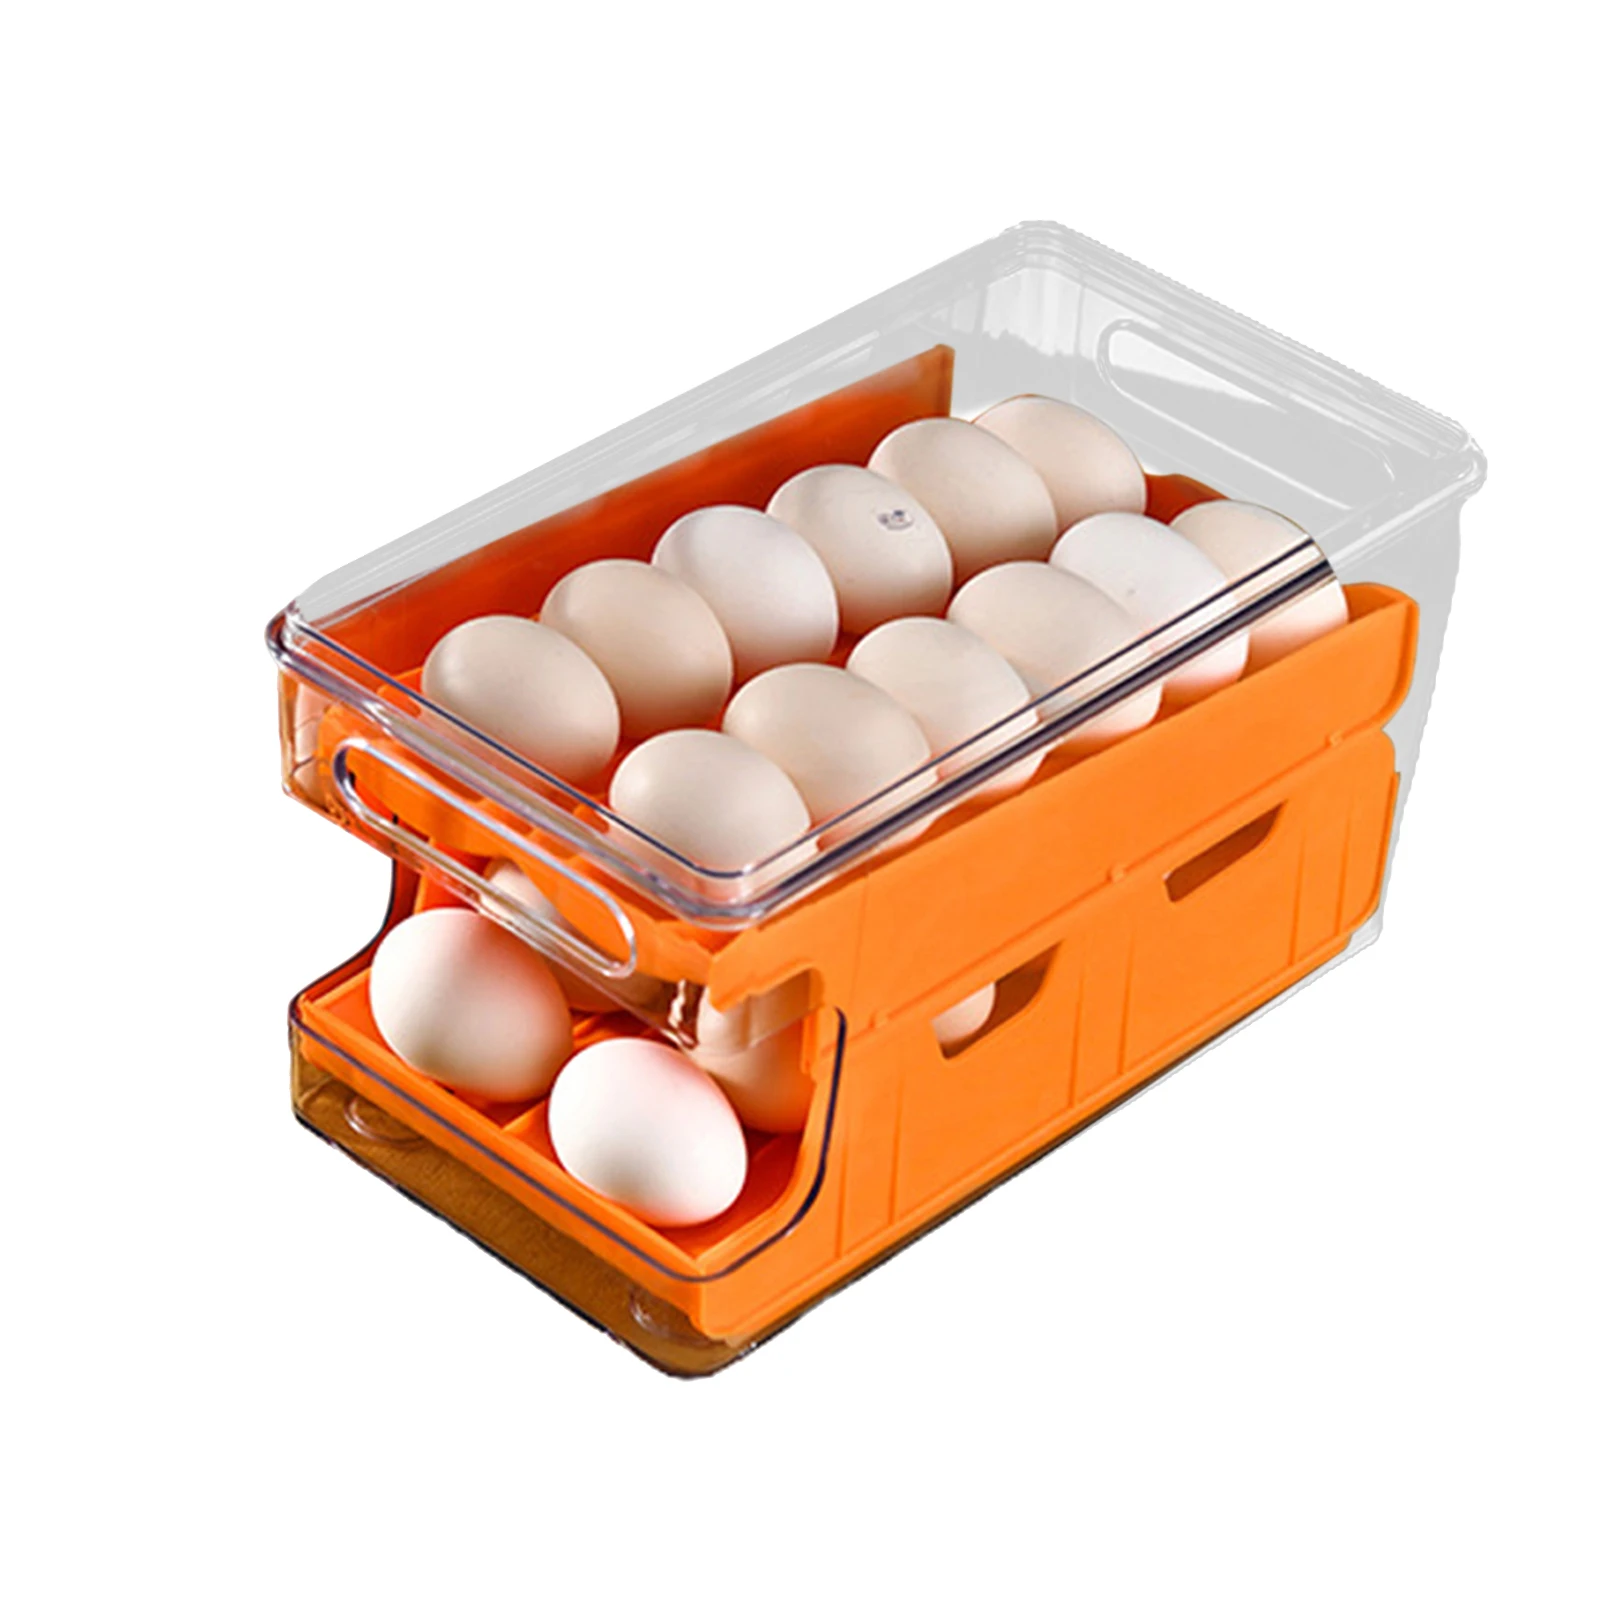 Automatic Rolling Egg Storage Rack 3-Layer Stackable Egg Tray for Fridge Hershuing 54 Grid Capacity Egg Holder for Refrigerator 